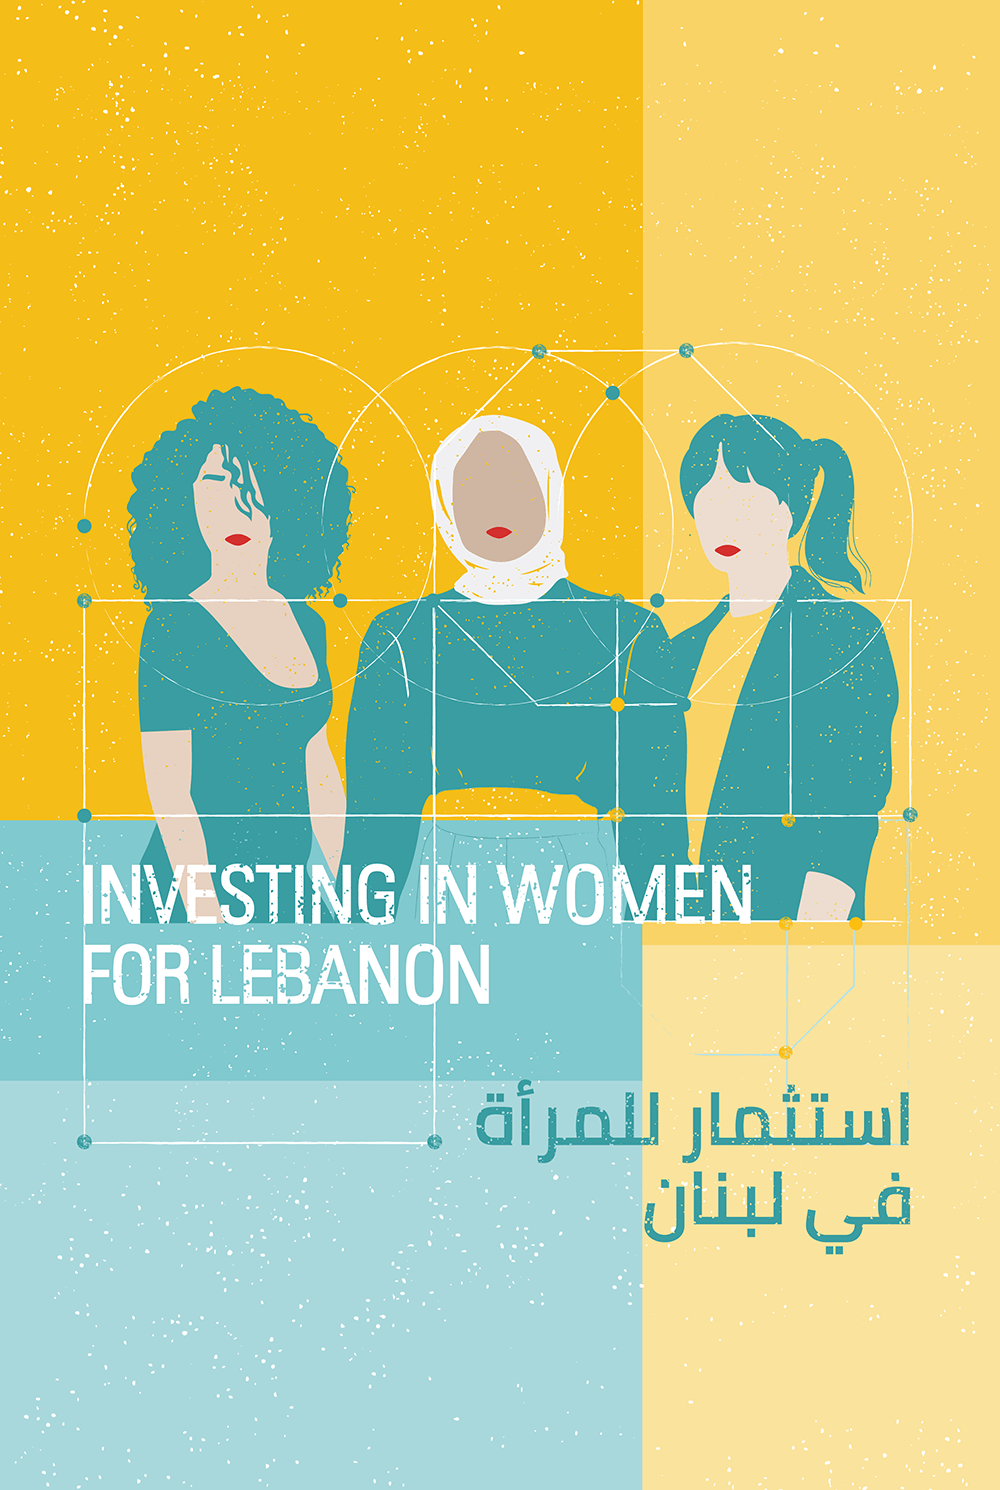 Illustration of women for the invest in women grant during Cycle 1 Grant